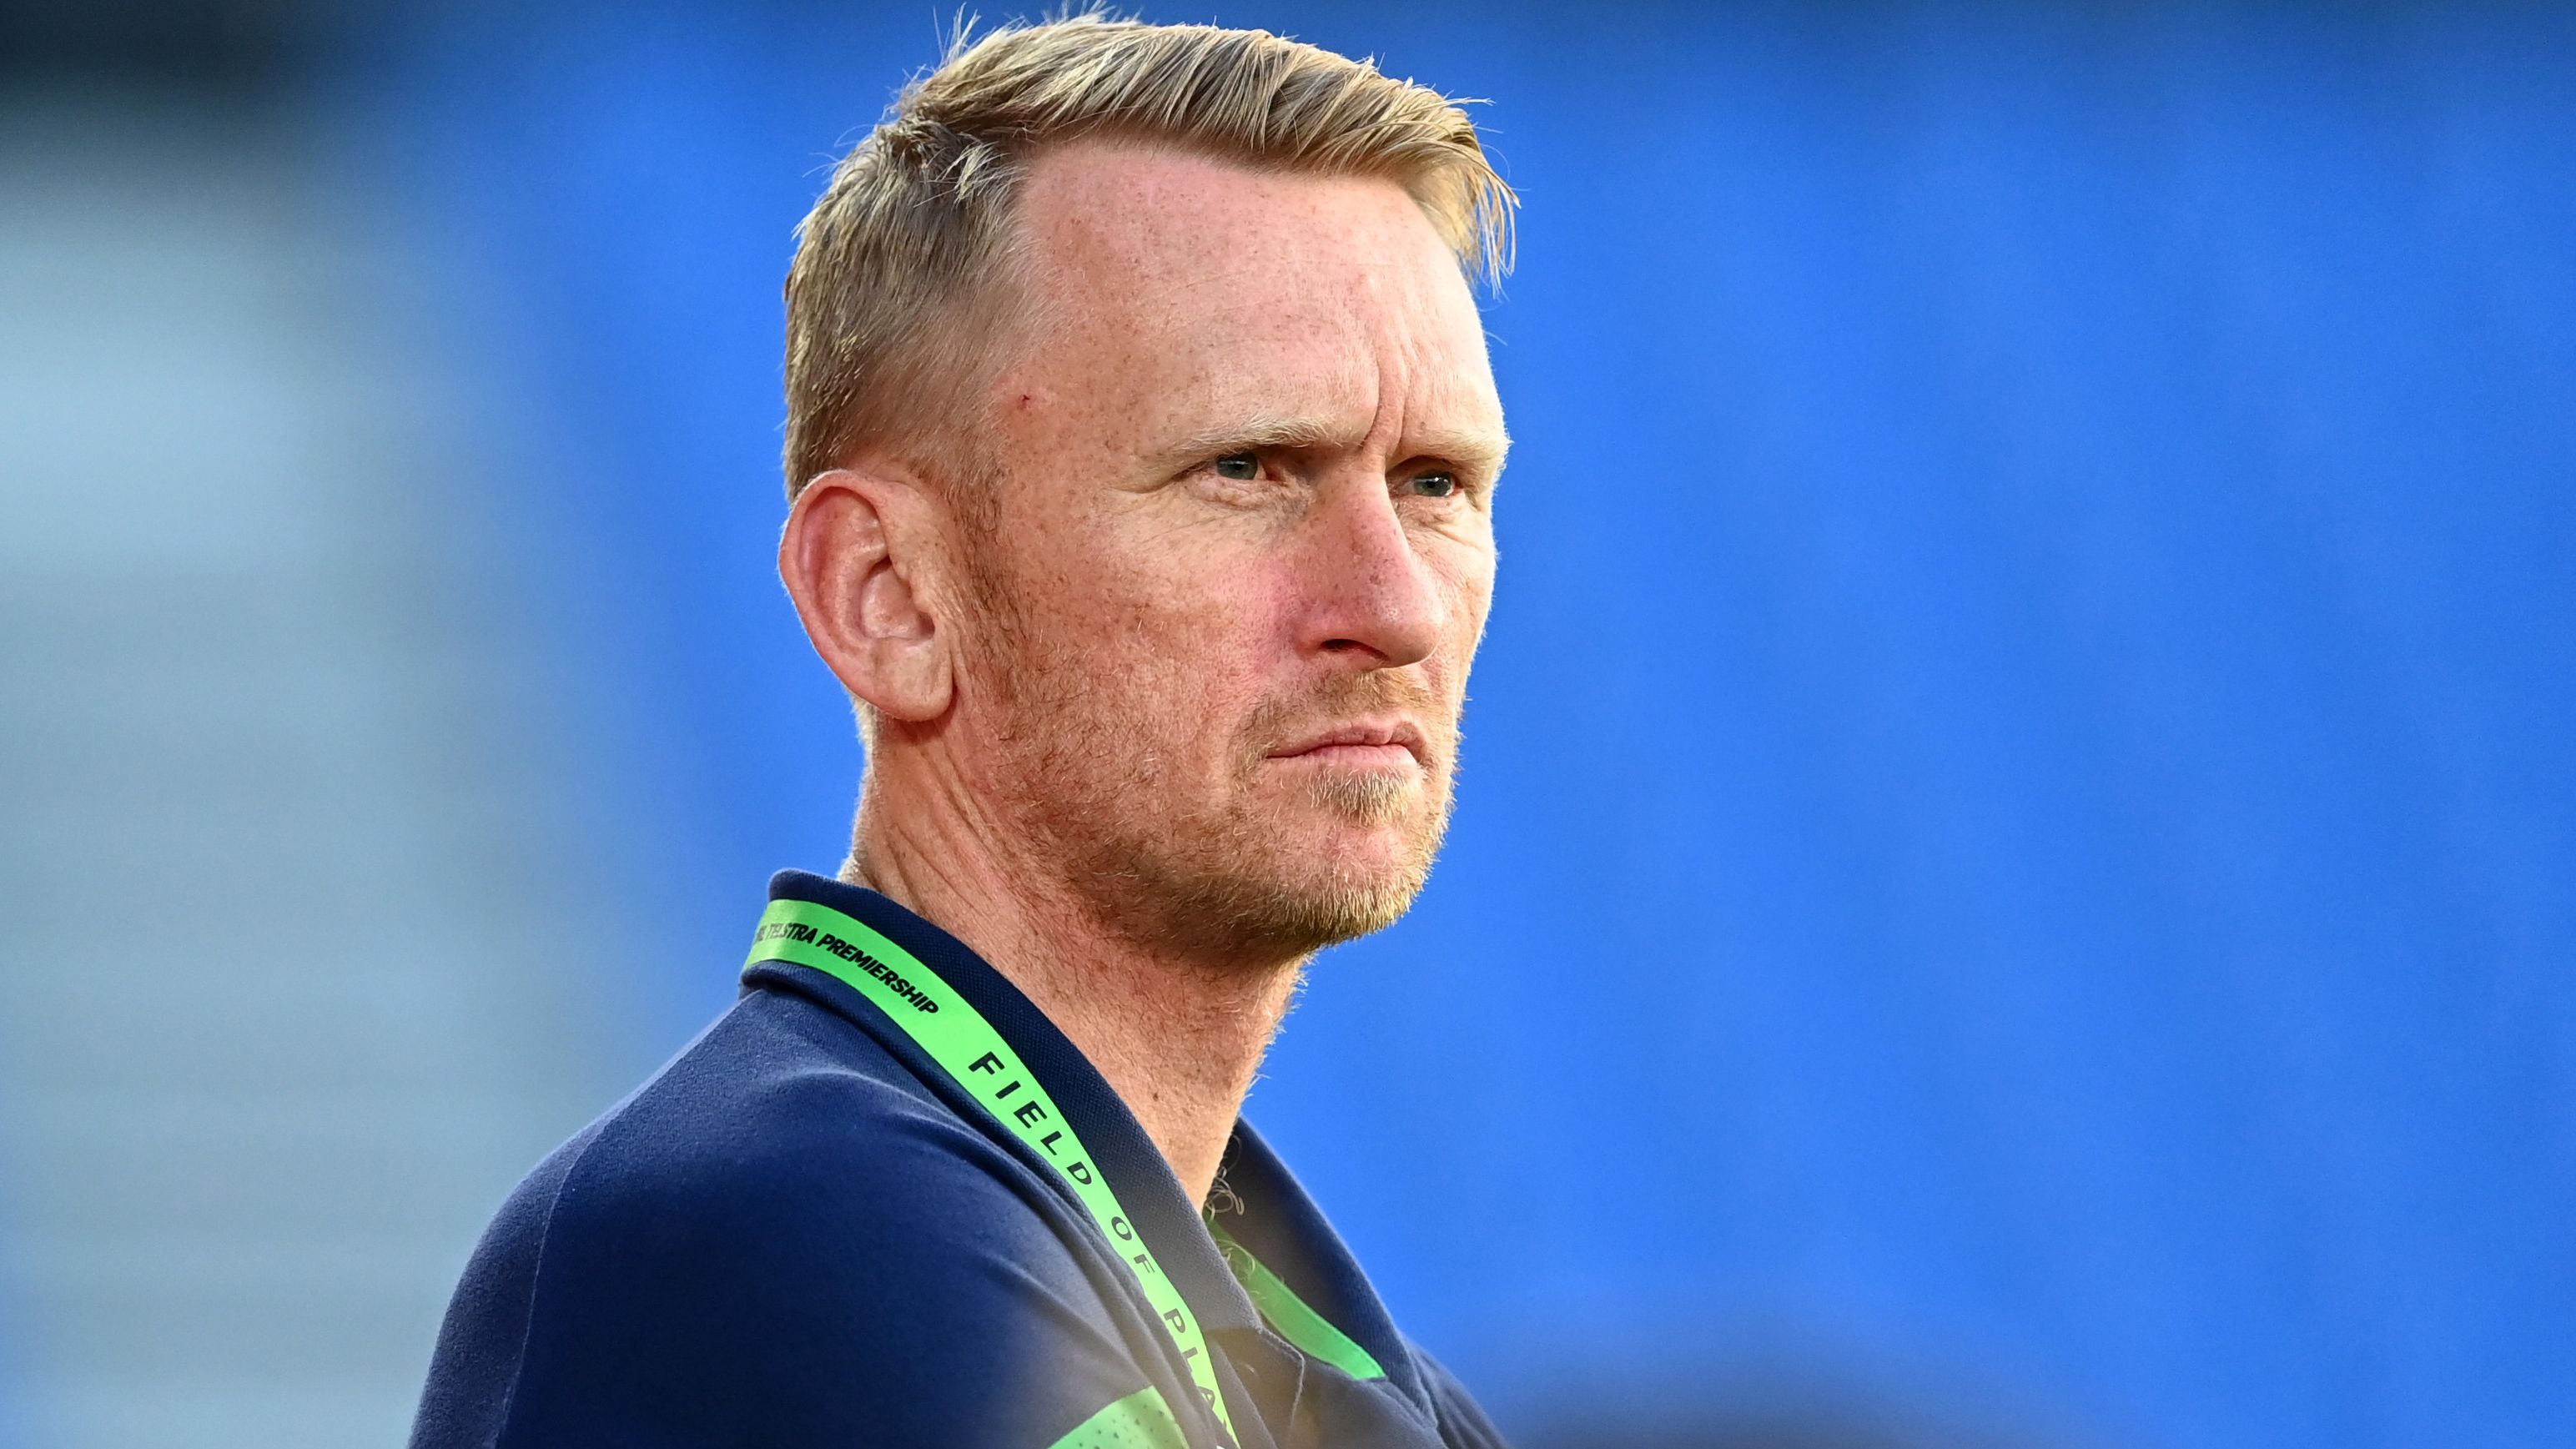 Warriors coach Andrew Webster looks on ahead of the NRL trial match between New Zealand Warriors and Wests Tigers at Mt Smart Stadium on February 09, 2023 in Auckland, New Zealand. (Photo by Hannah Peters/Getty Images)